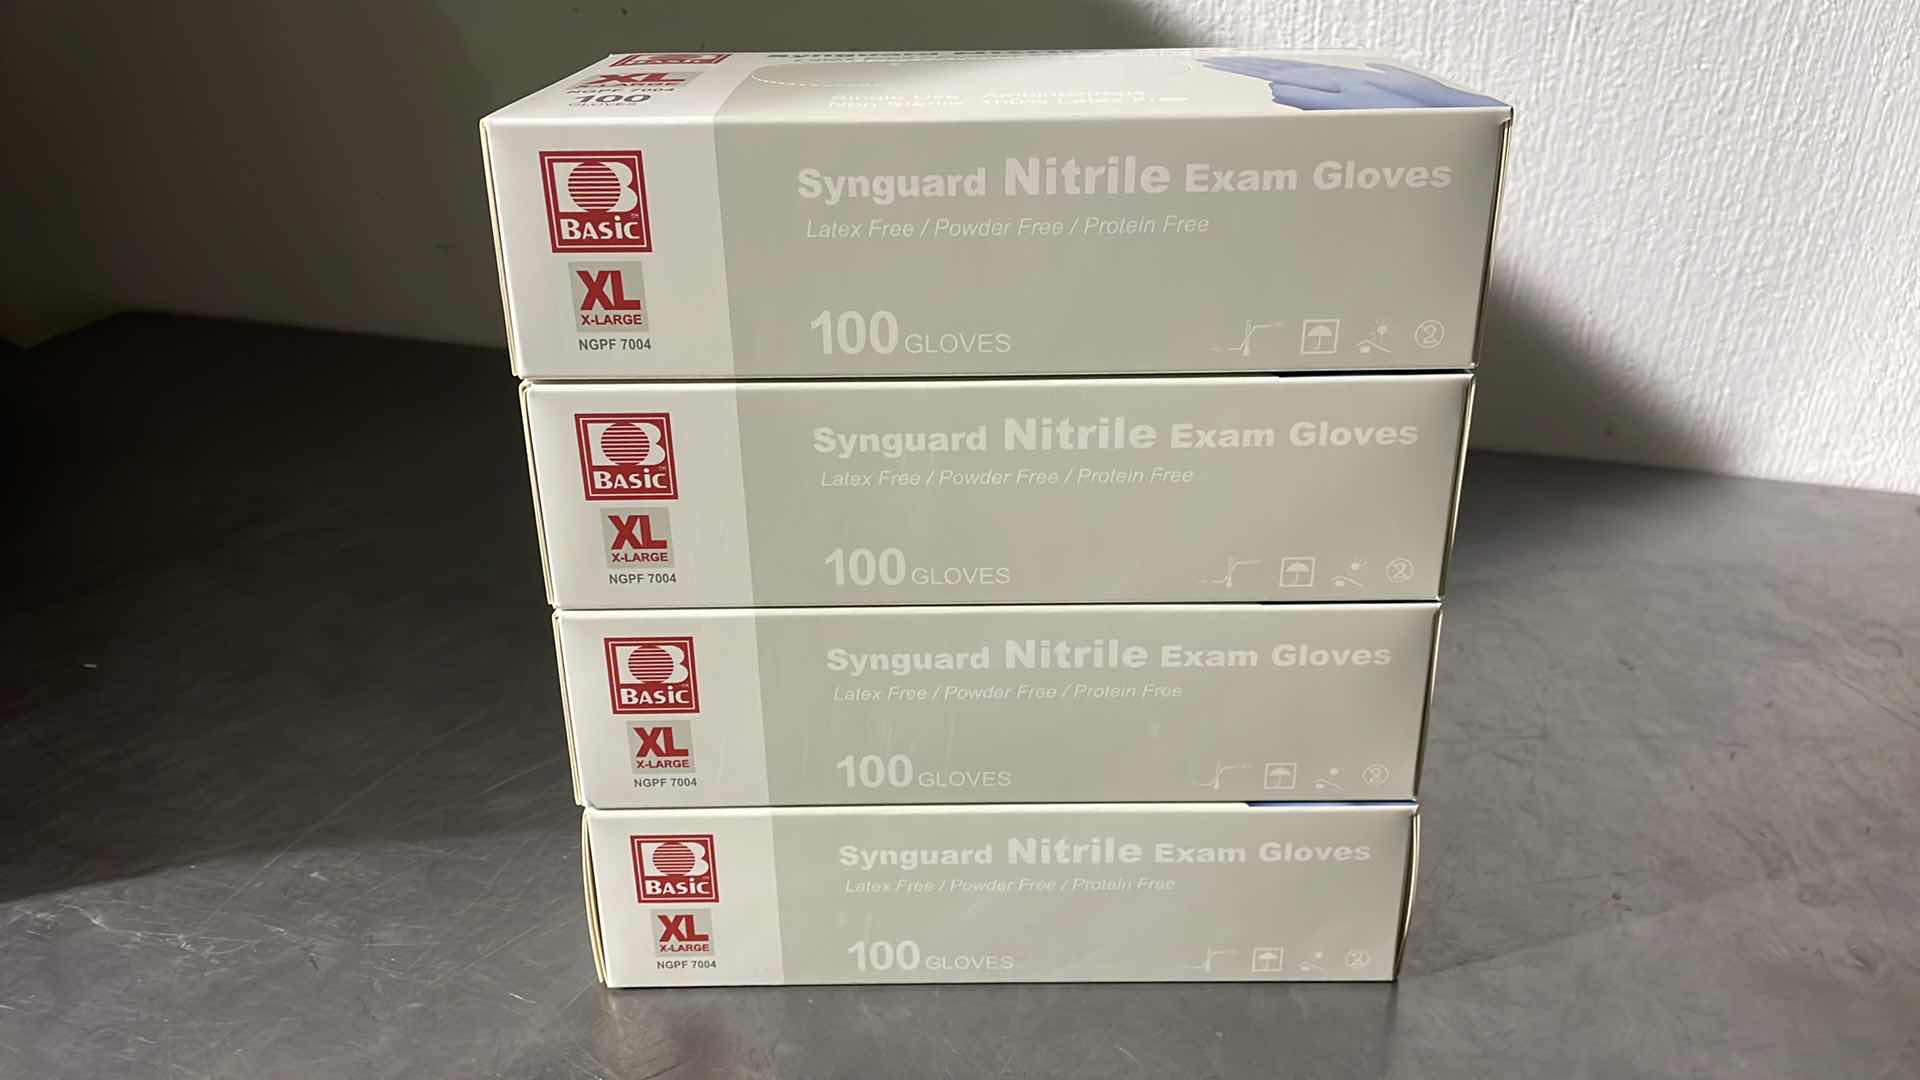 Photo 2 of BASIC MEDICAL NITRILE EXAM GLOVES XL- LATEX-FREE & POWDER-FREE & NON-STERILE, DISPOSABLE GLOVES (PACK OF 100, BLUE)(4 BOXES)